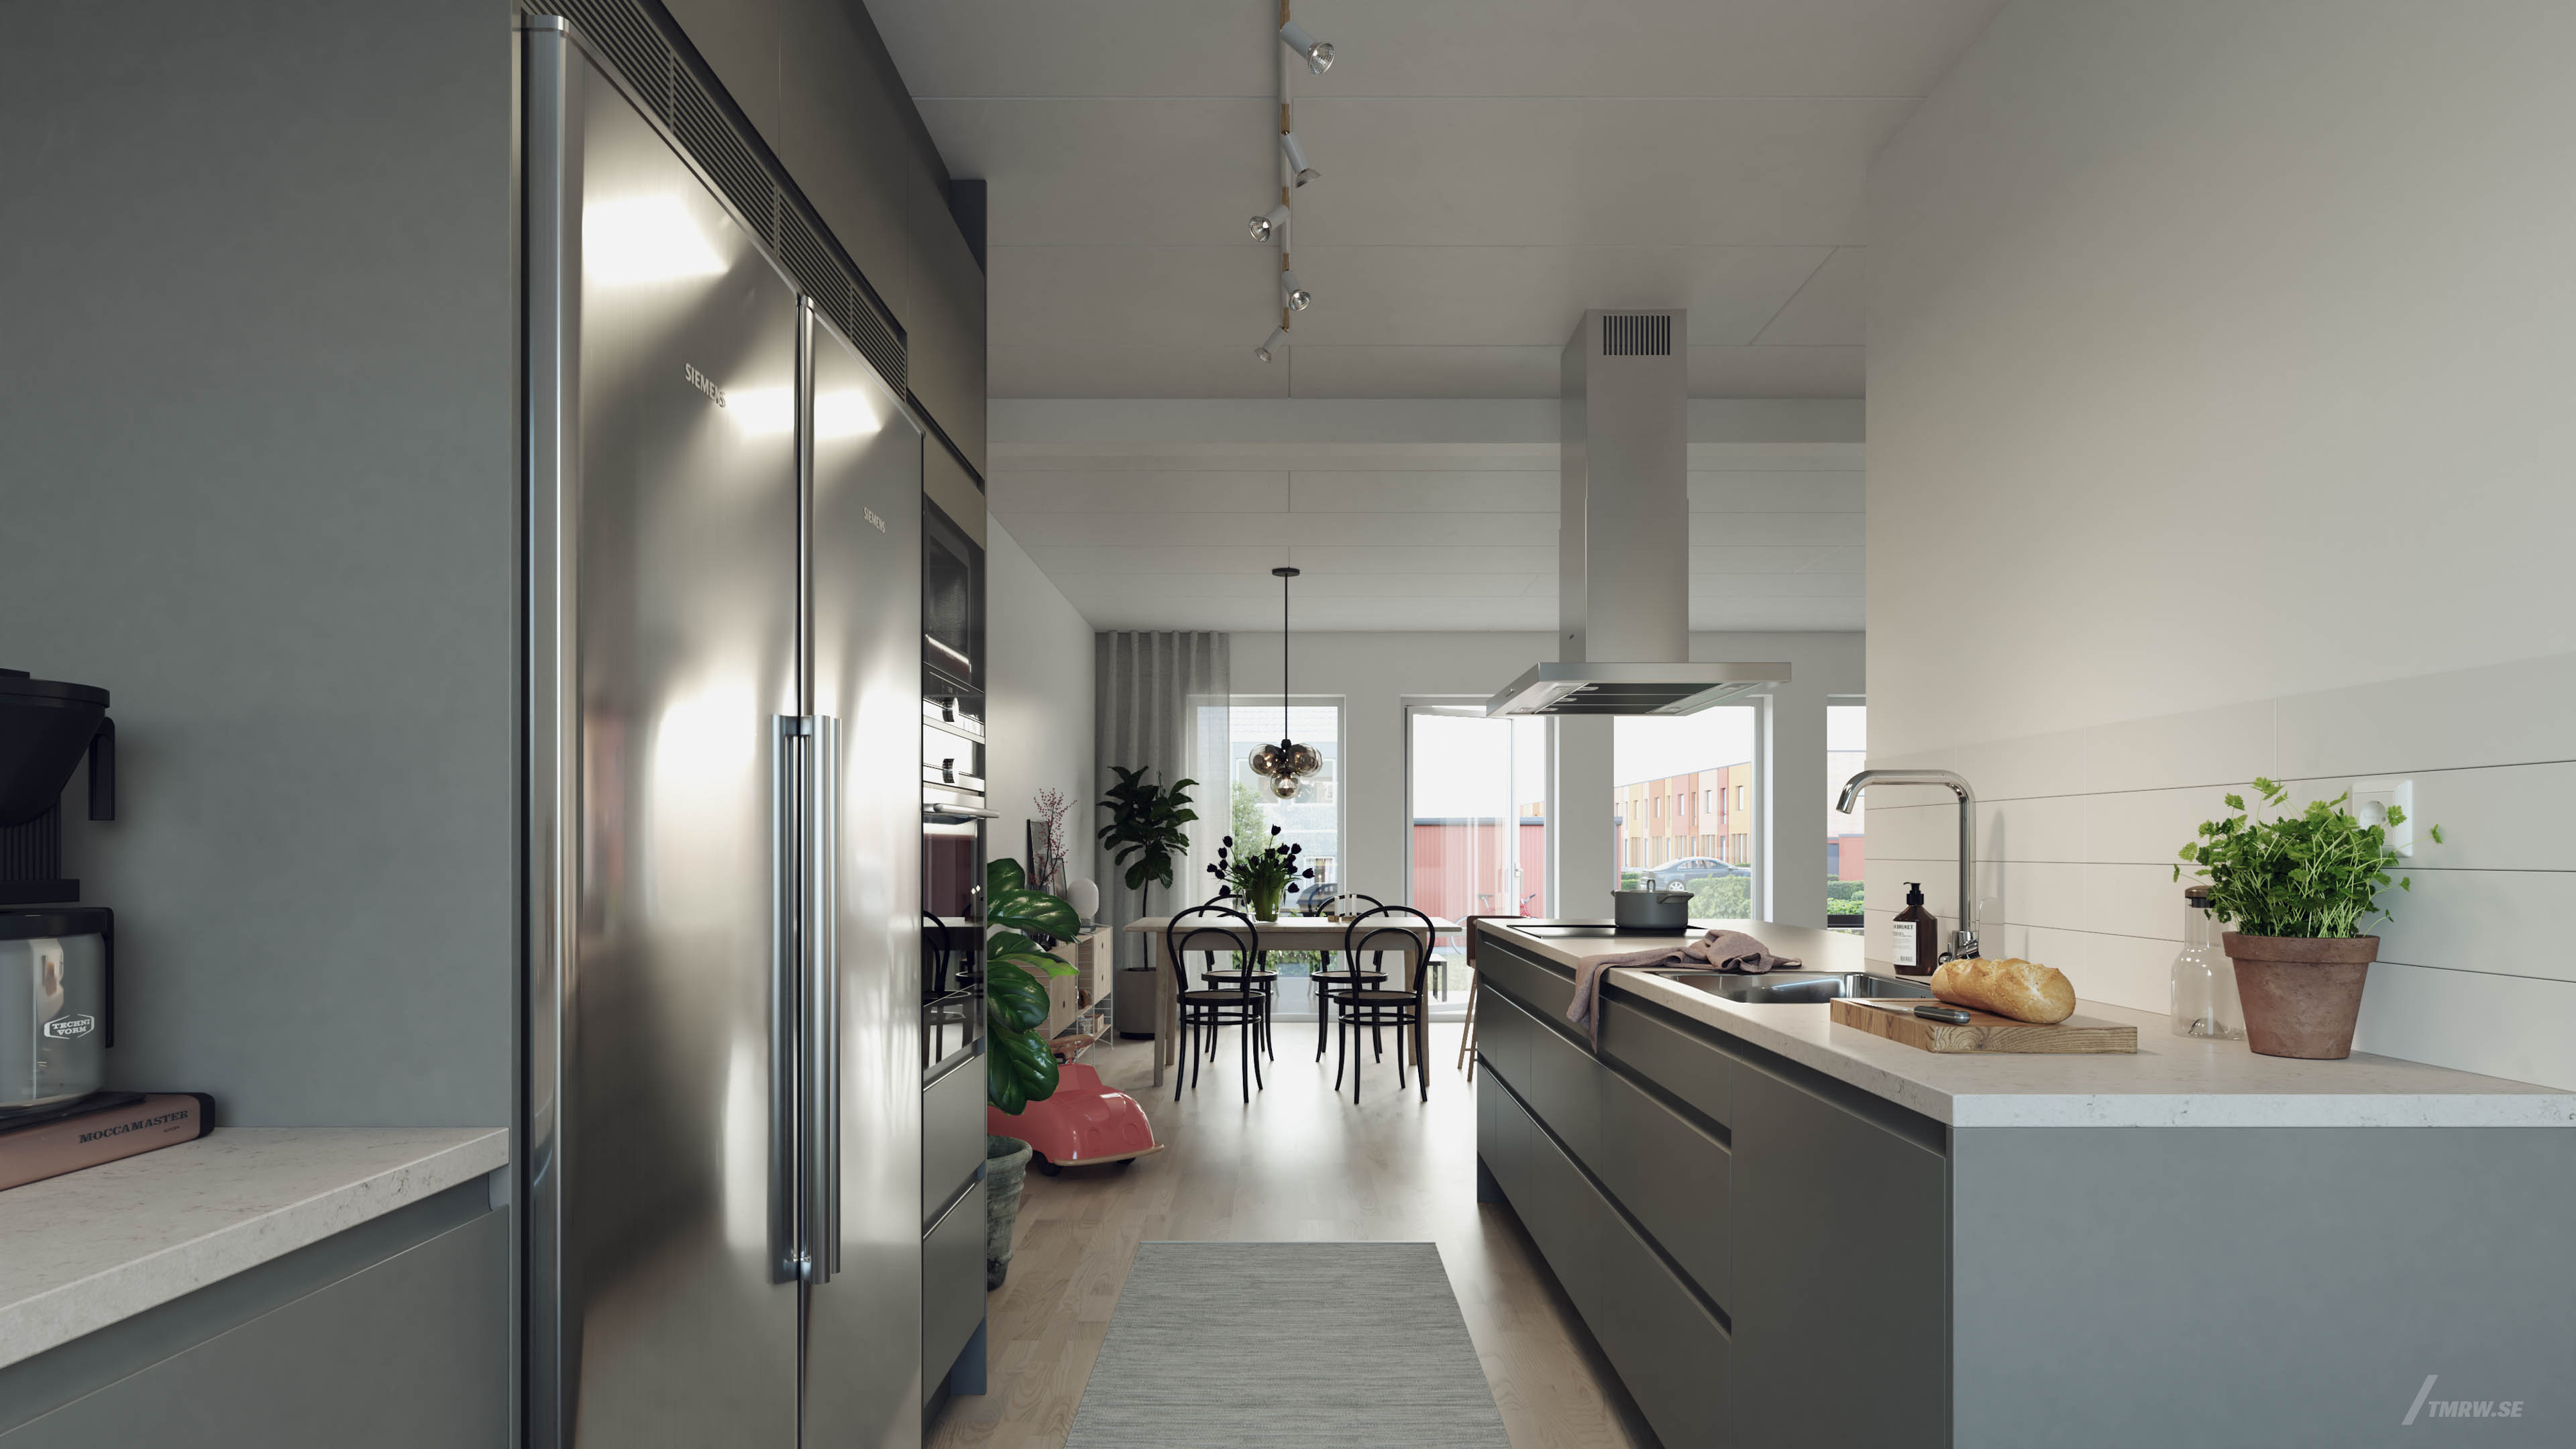 Architectural visualization of Hököpinge for Nordr, kitchen in day light from a interior view